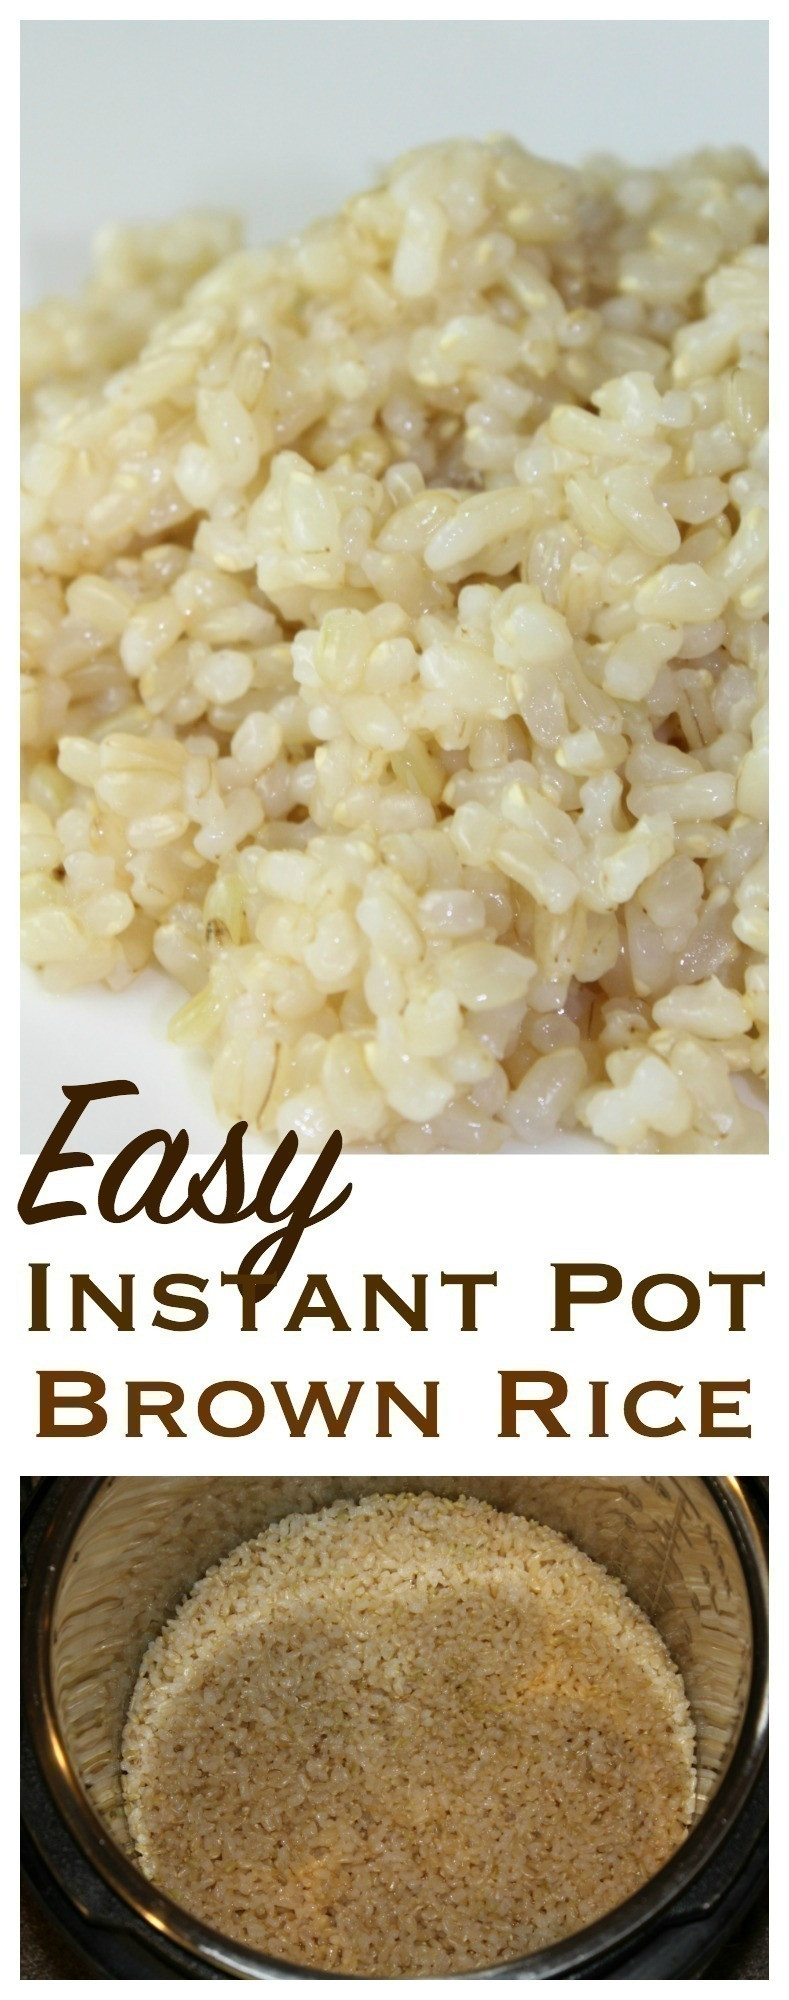 Instant Pot Brown Rice Recipe
 Easy Brown Rice in the Instant Pot